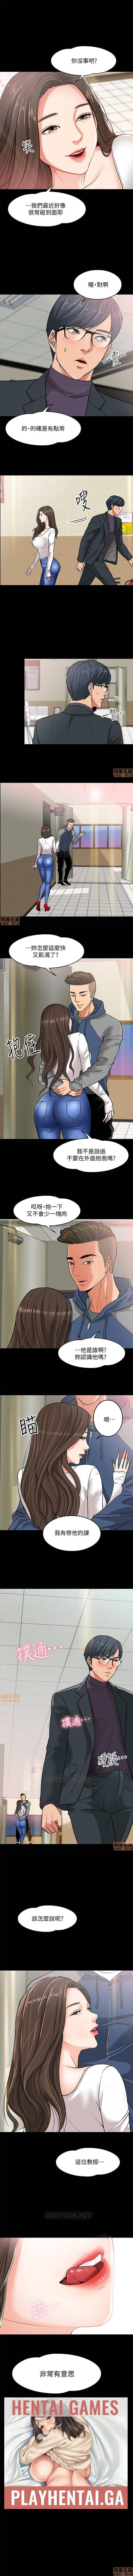 PROFESSOR, ARE YOU JUST GOING TO LOOK AT ME? | DESIRE SWAMP | 教授，你還等什麼? Ch. 2 [Chinese] Manhwa 9